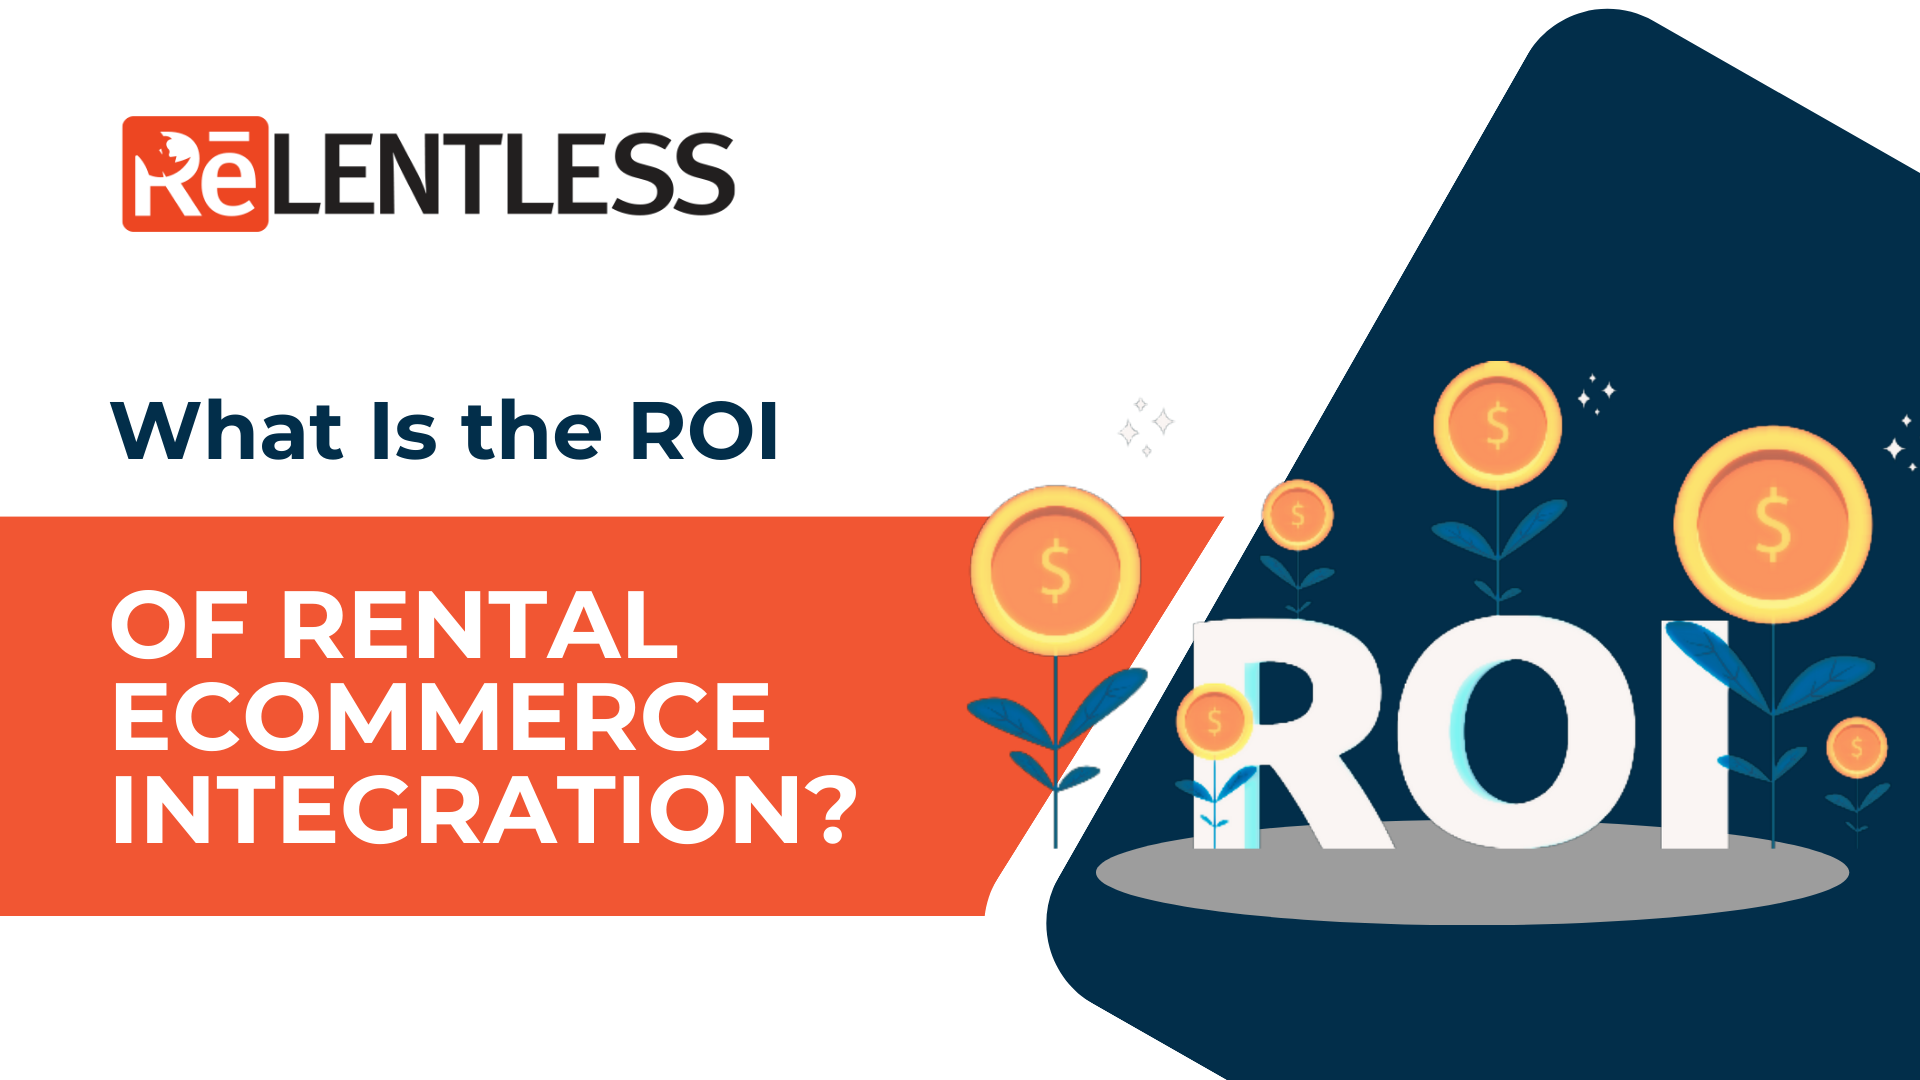 What Is the ROI of Rental Ecommerce Integration